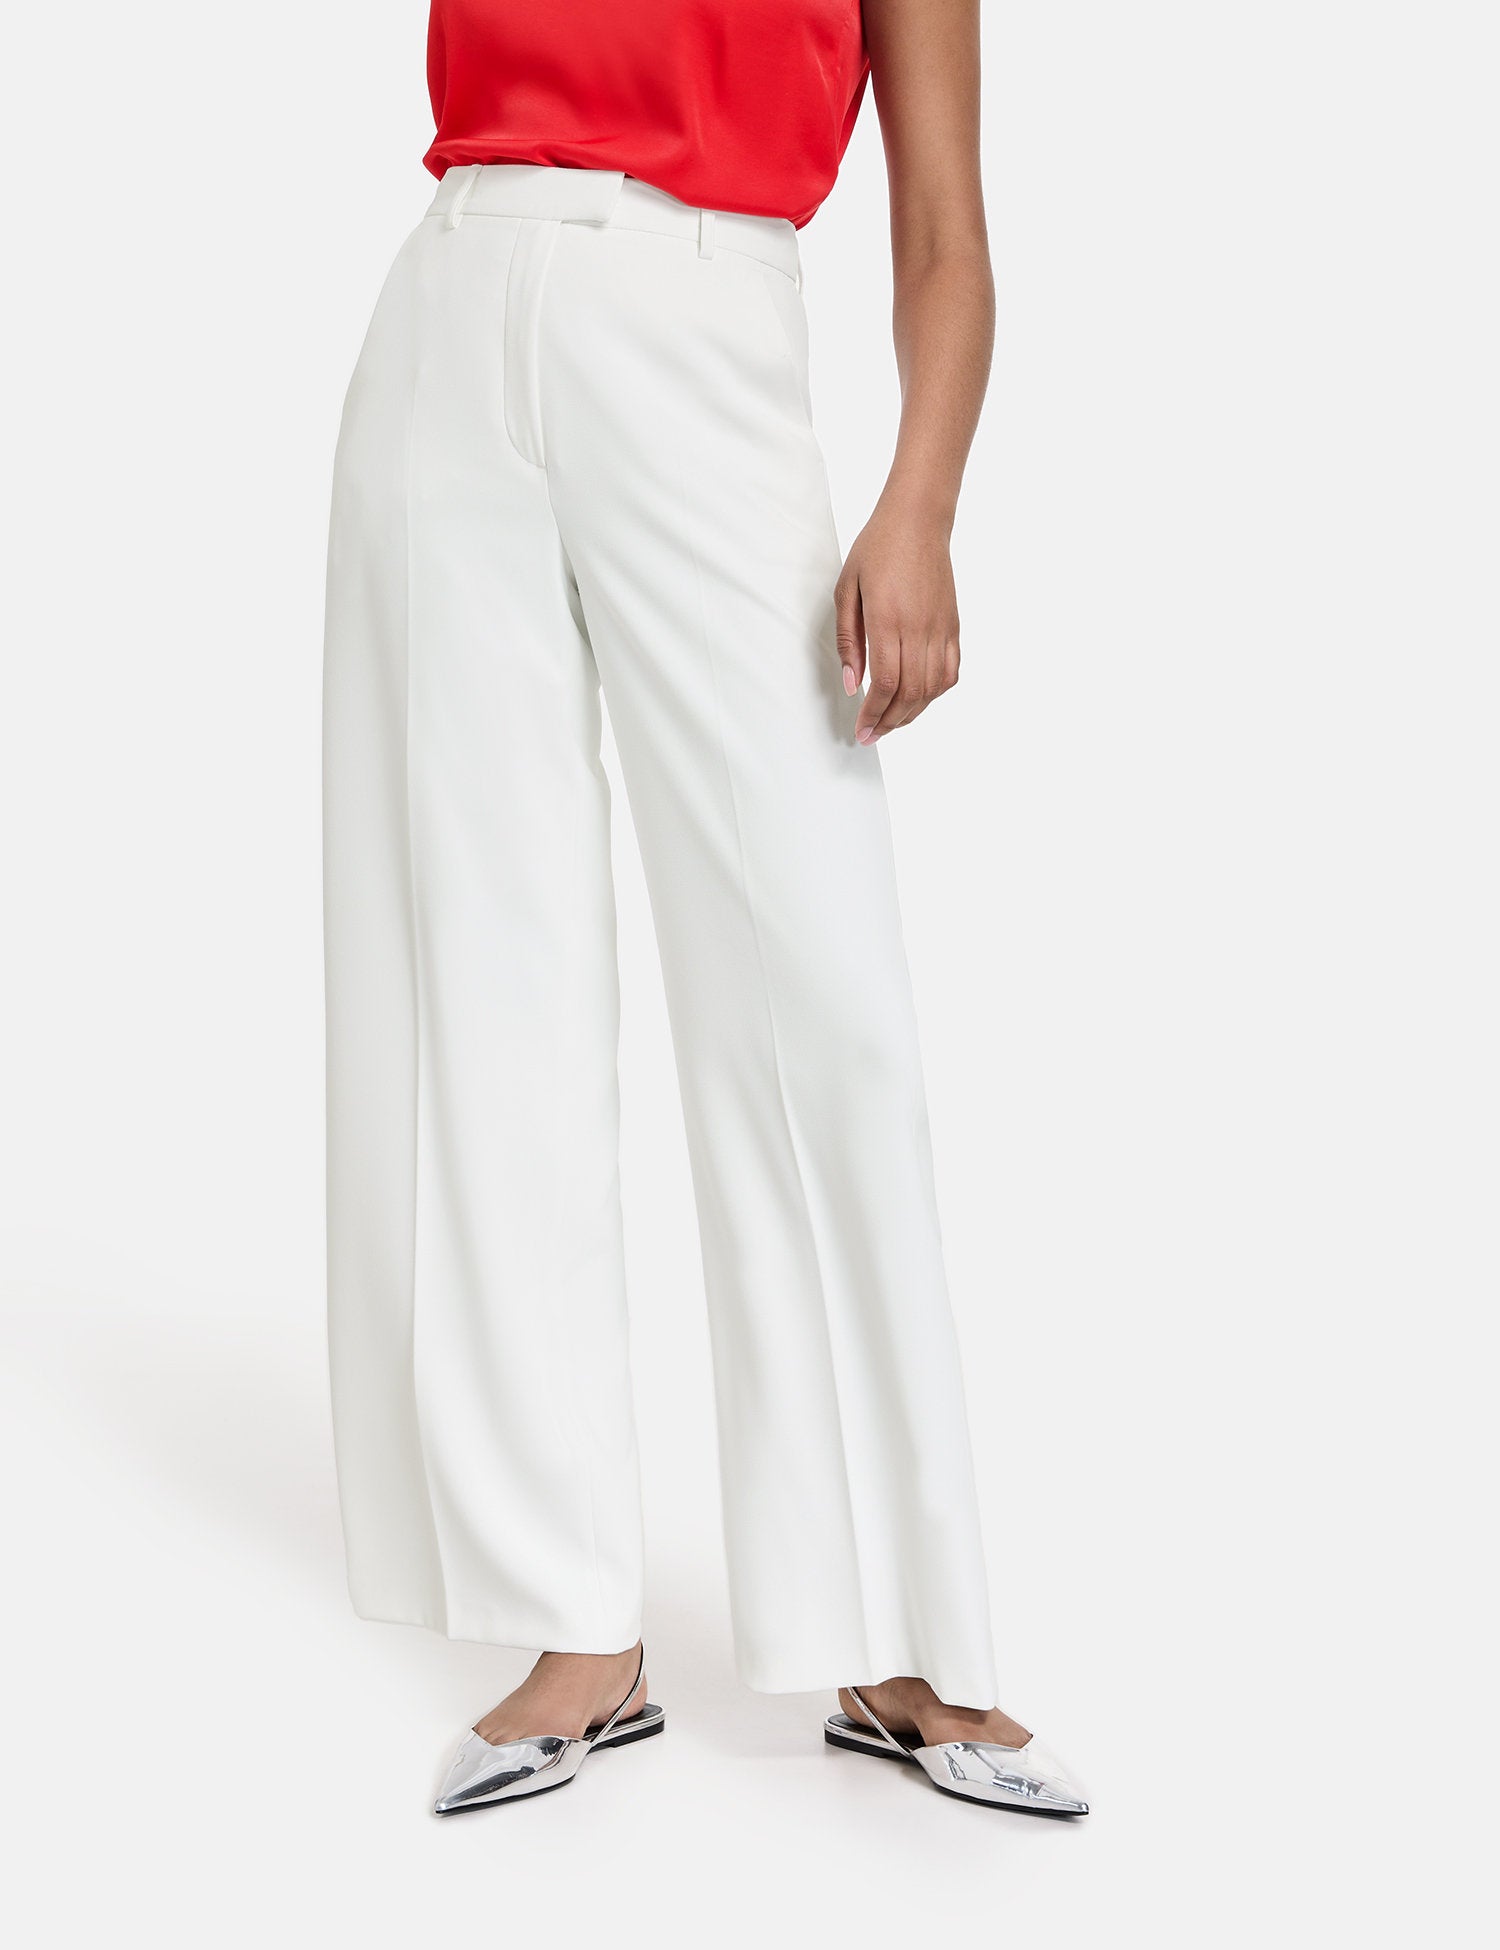 Elegant Trousers With A Wide Leg_520334-11081_9600_04